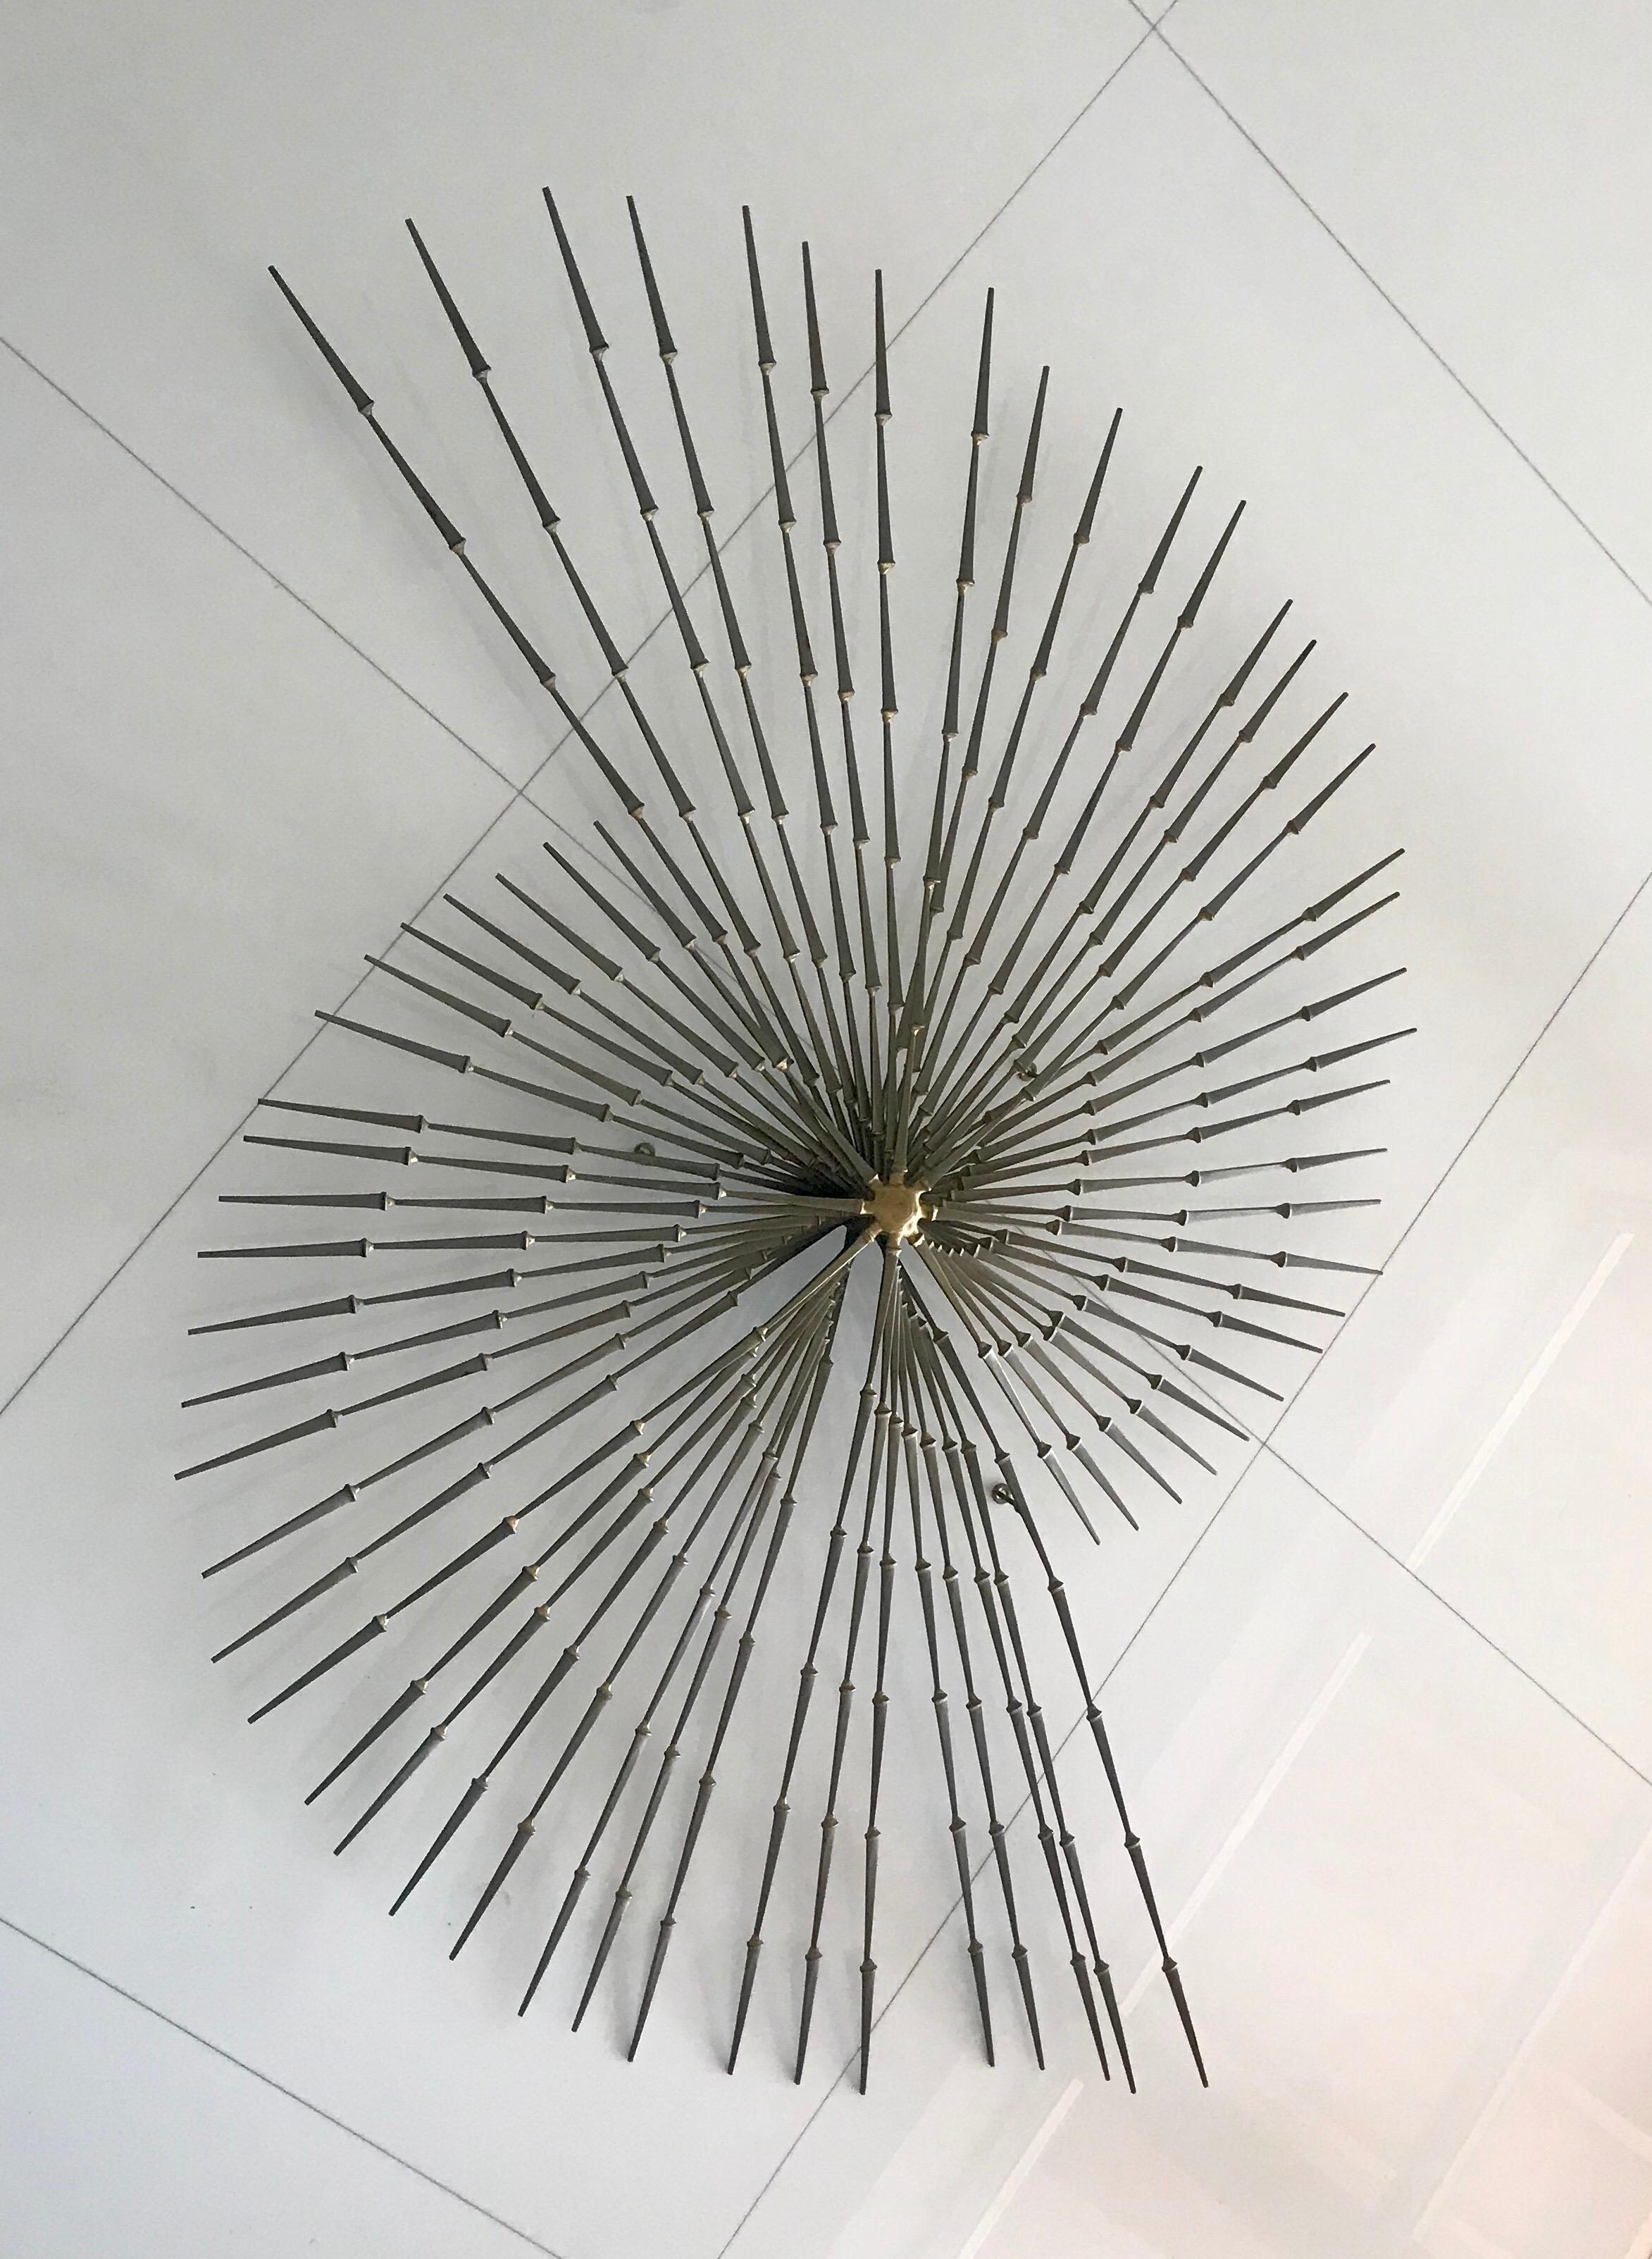 The blackened steel and brass form a dynamic complement to each other and the nails are tapered to form rays as they extend outwards. The pinwheel starburst reflects modern design, brutalism and neoclassical aesthetics.